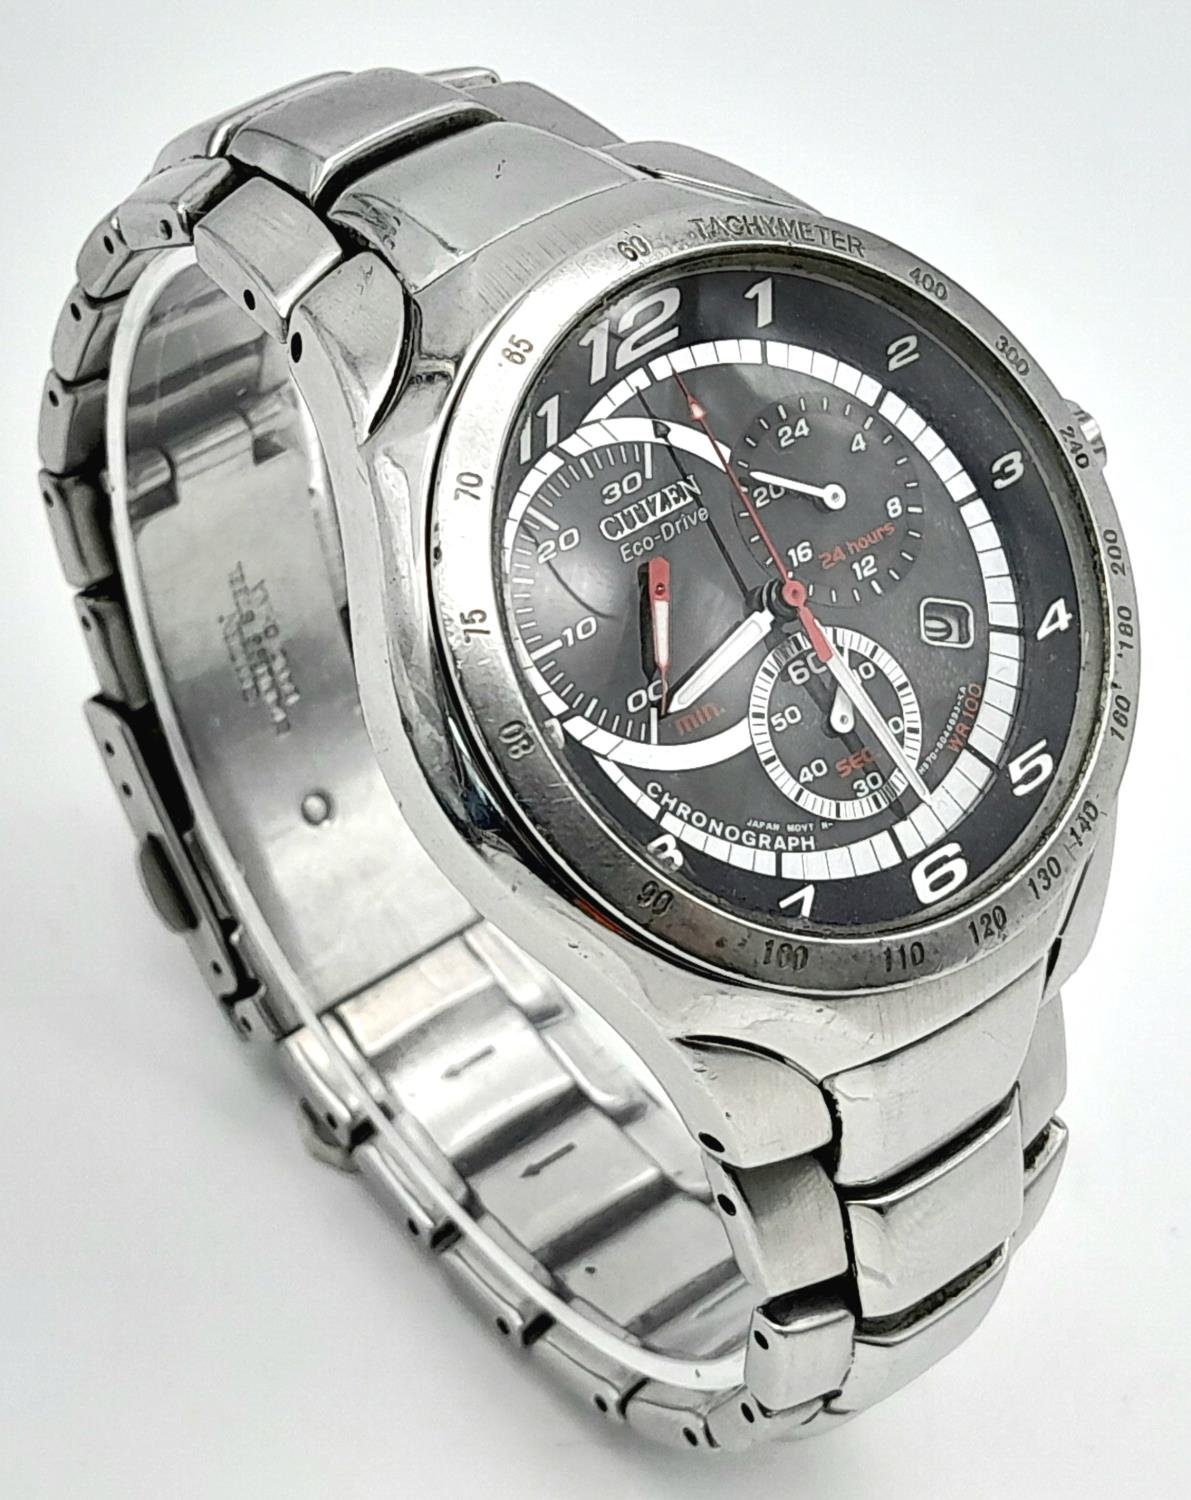 A Citizen Eco Drive Chronograph Gents Watch. Stainless steel bracelet and case - 42mm. Black dial - Image 3 of 6